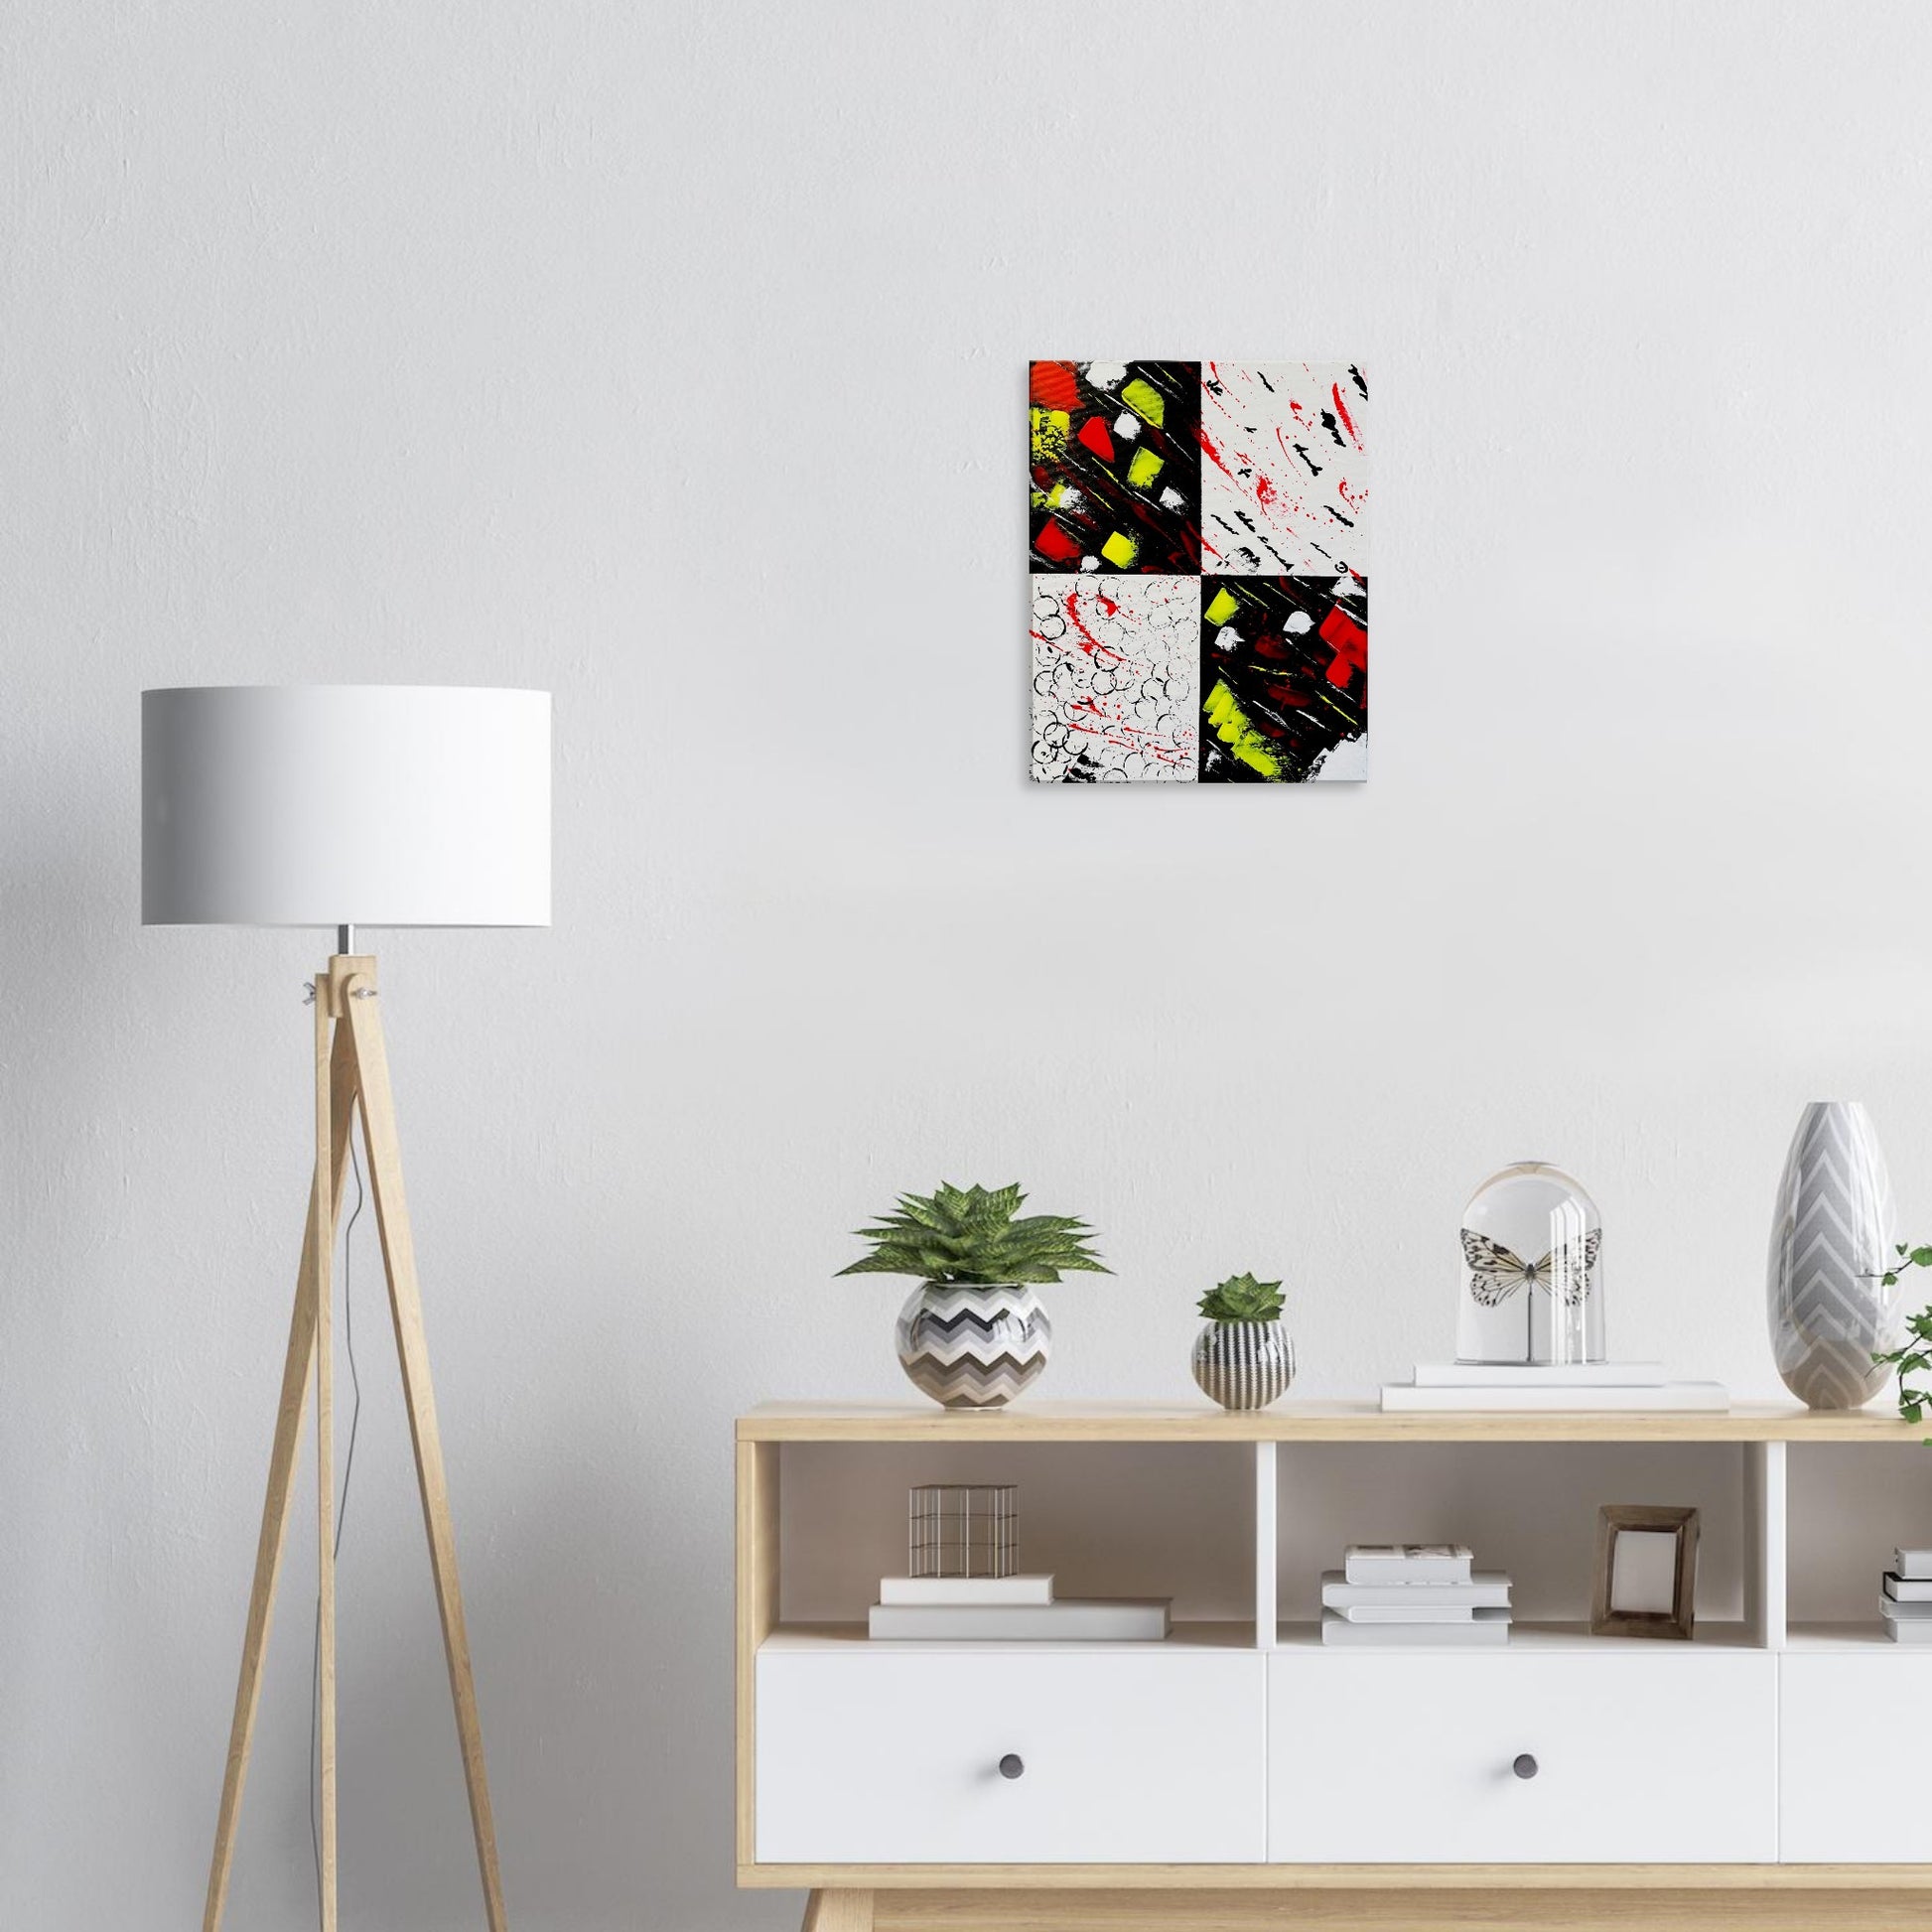 Yana Virtuoso's 'Flight of Human Emotions' canvas print in a living room setting, showcasing the piece's vibrant palette and emotive energy, harmonizing with the interior and enriching the home's ambiance.